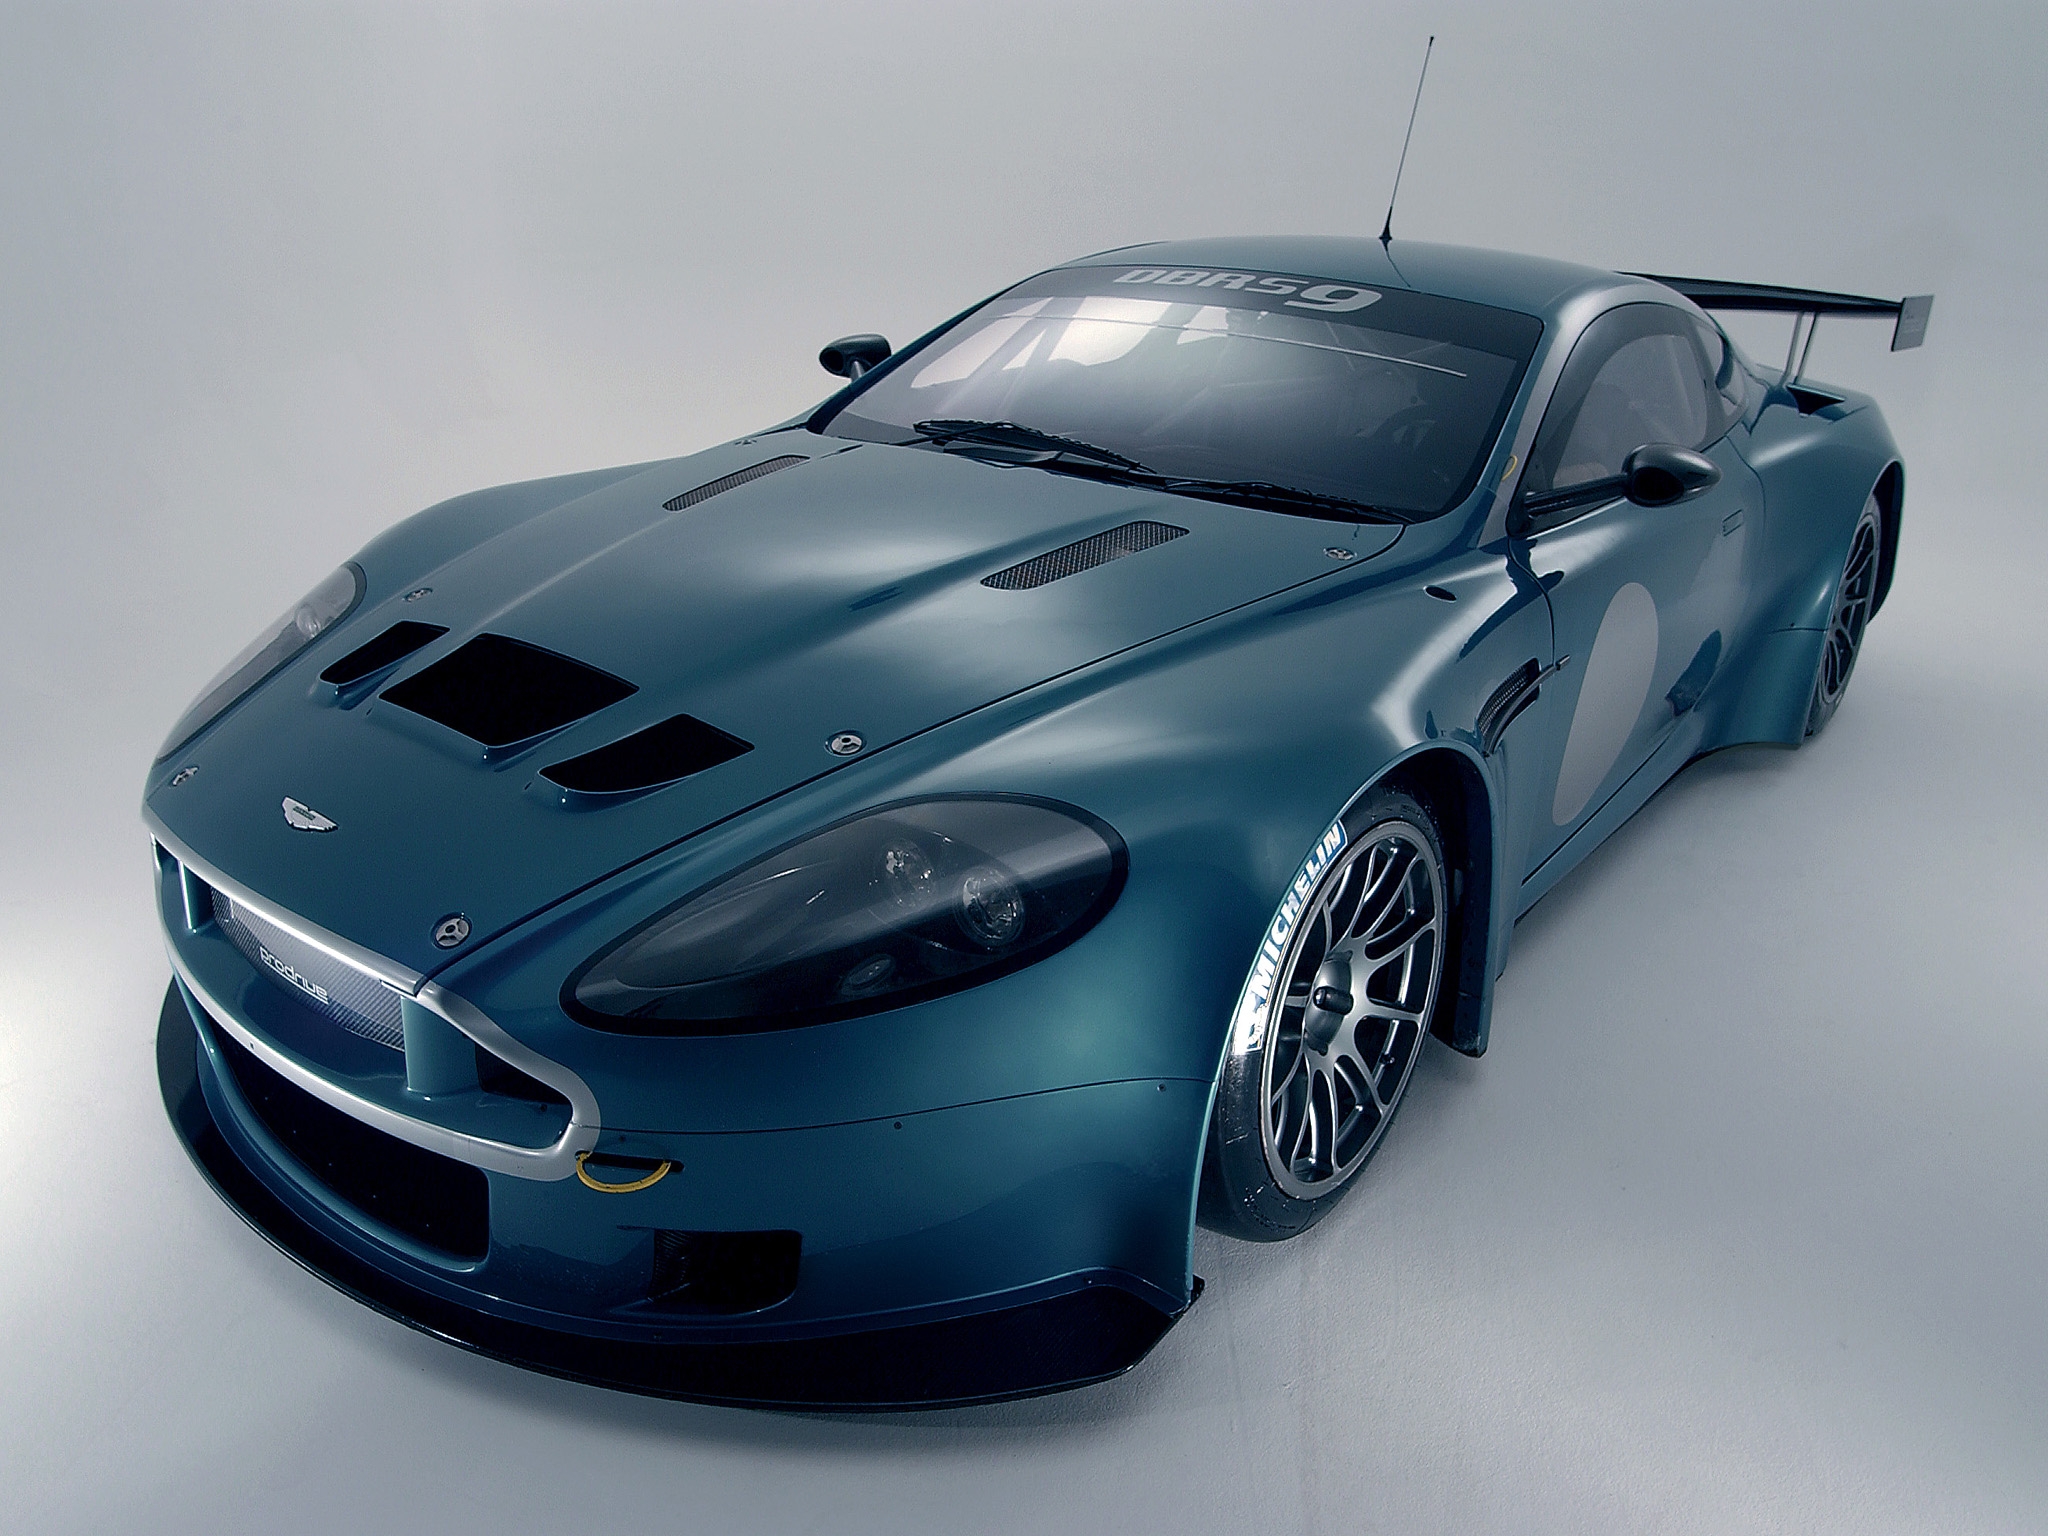 Windows Backgrounds sports, auto, aston martin, cars, green, front view, style, 2005, dbrs9